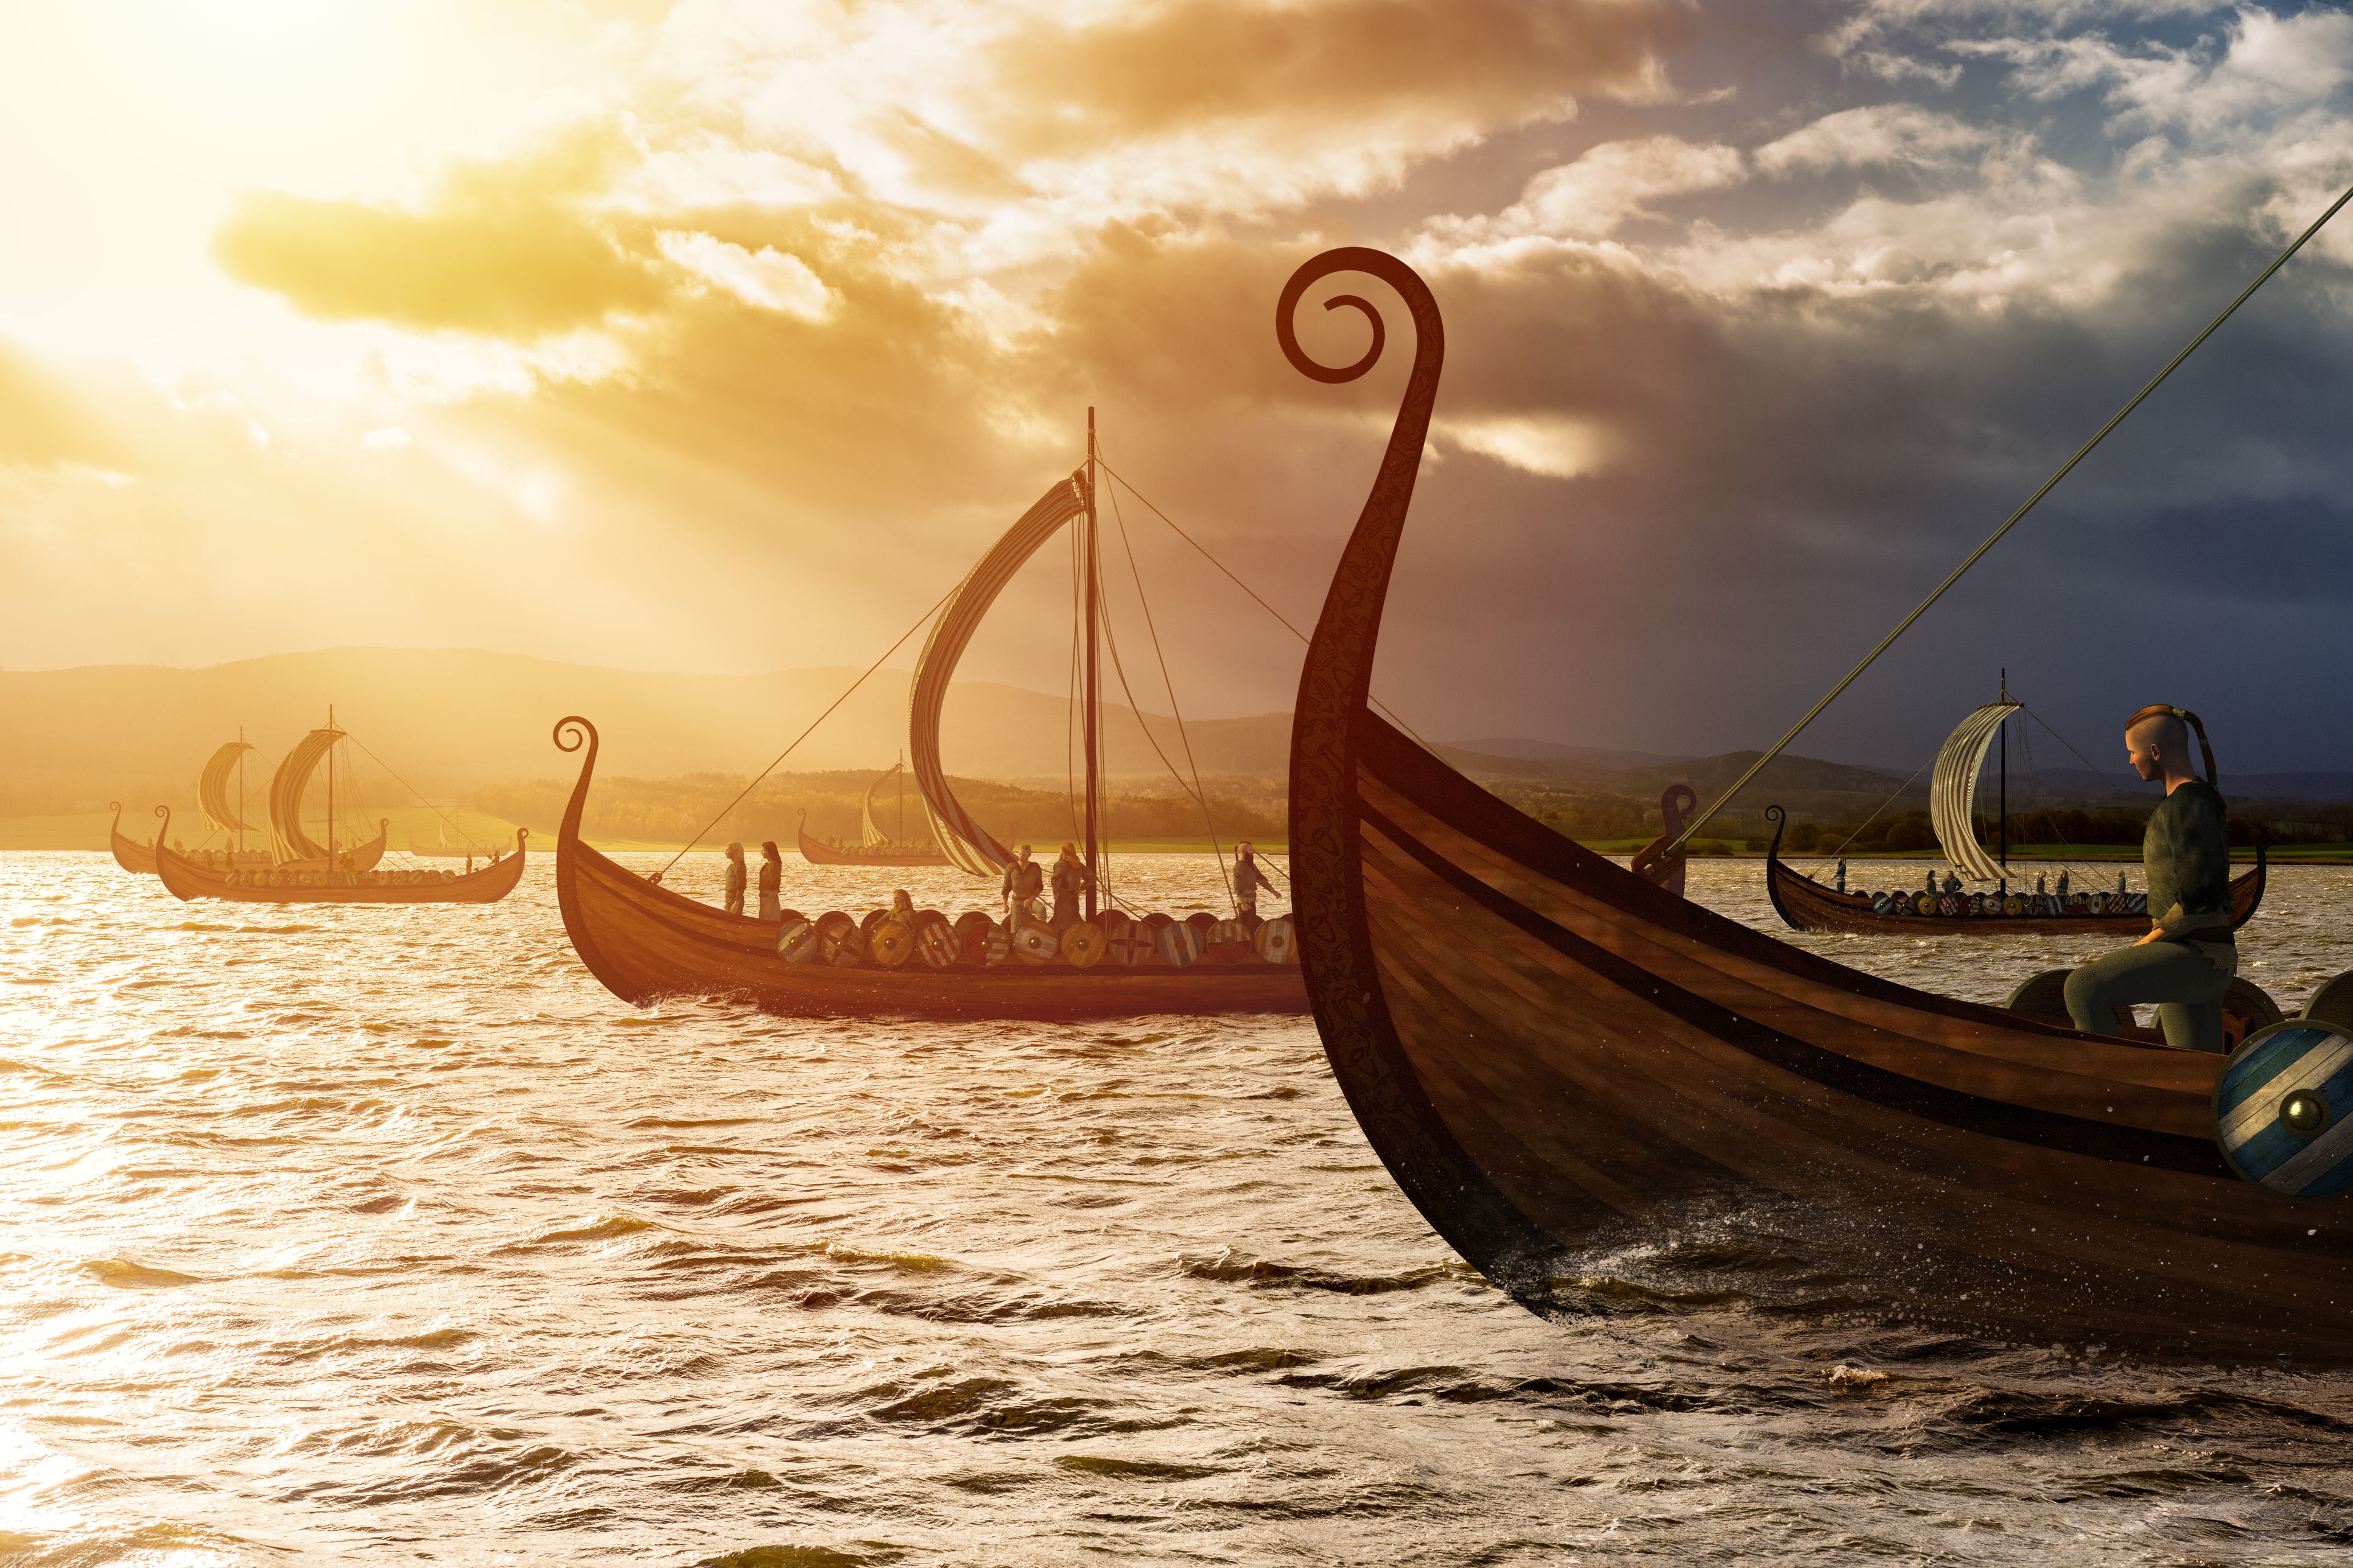 Viking Ships On The Water Under The Sunlight And Dark Storm 905540434 5aa18d95a9d4f90036158bdd 